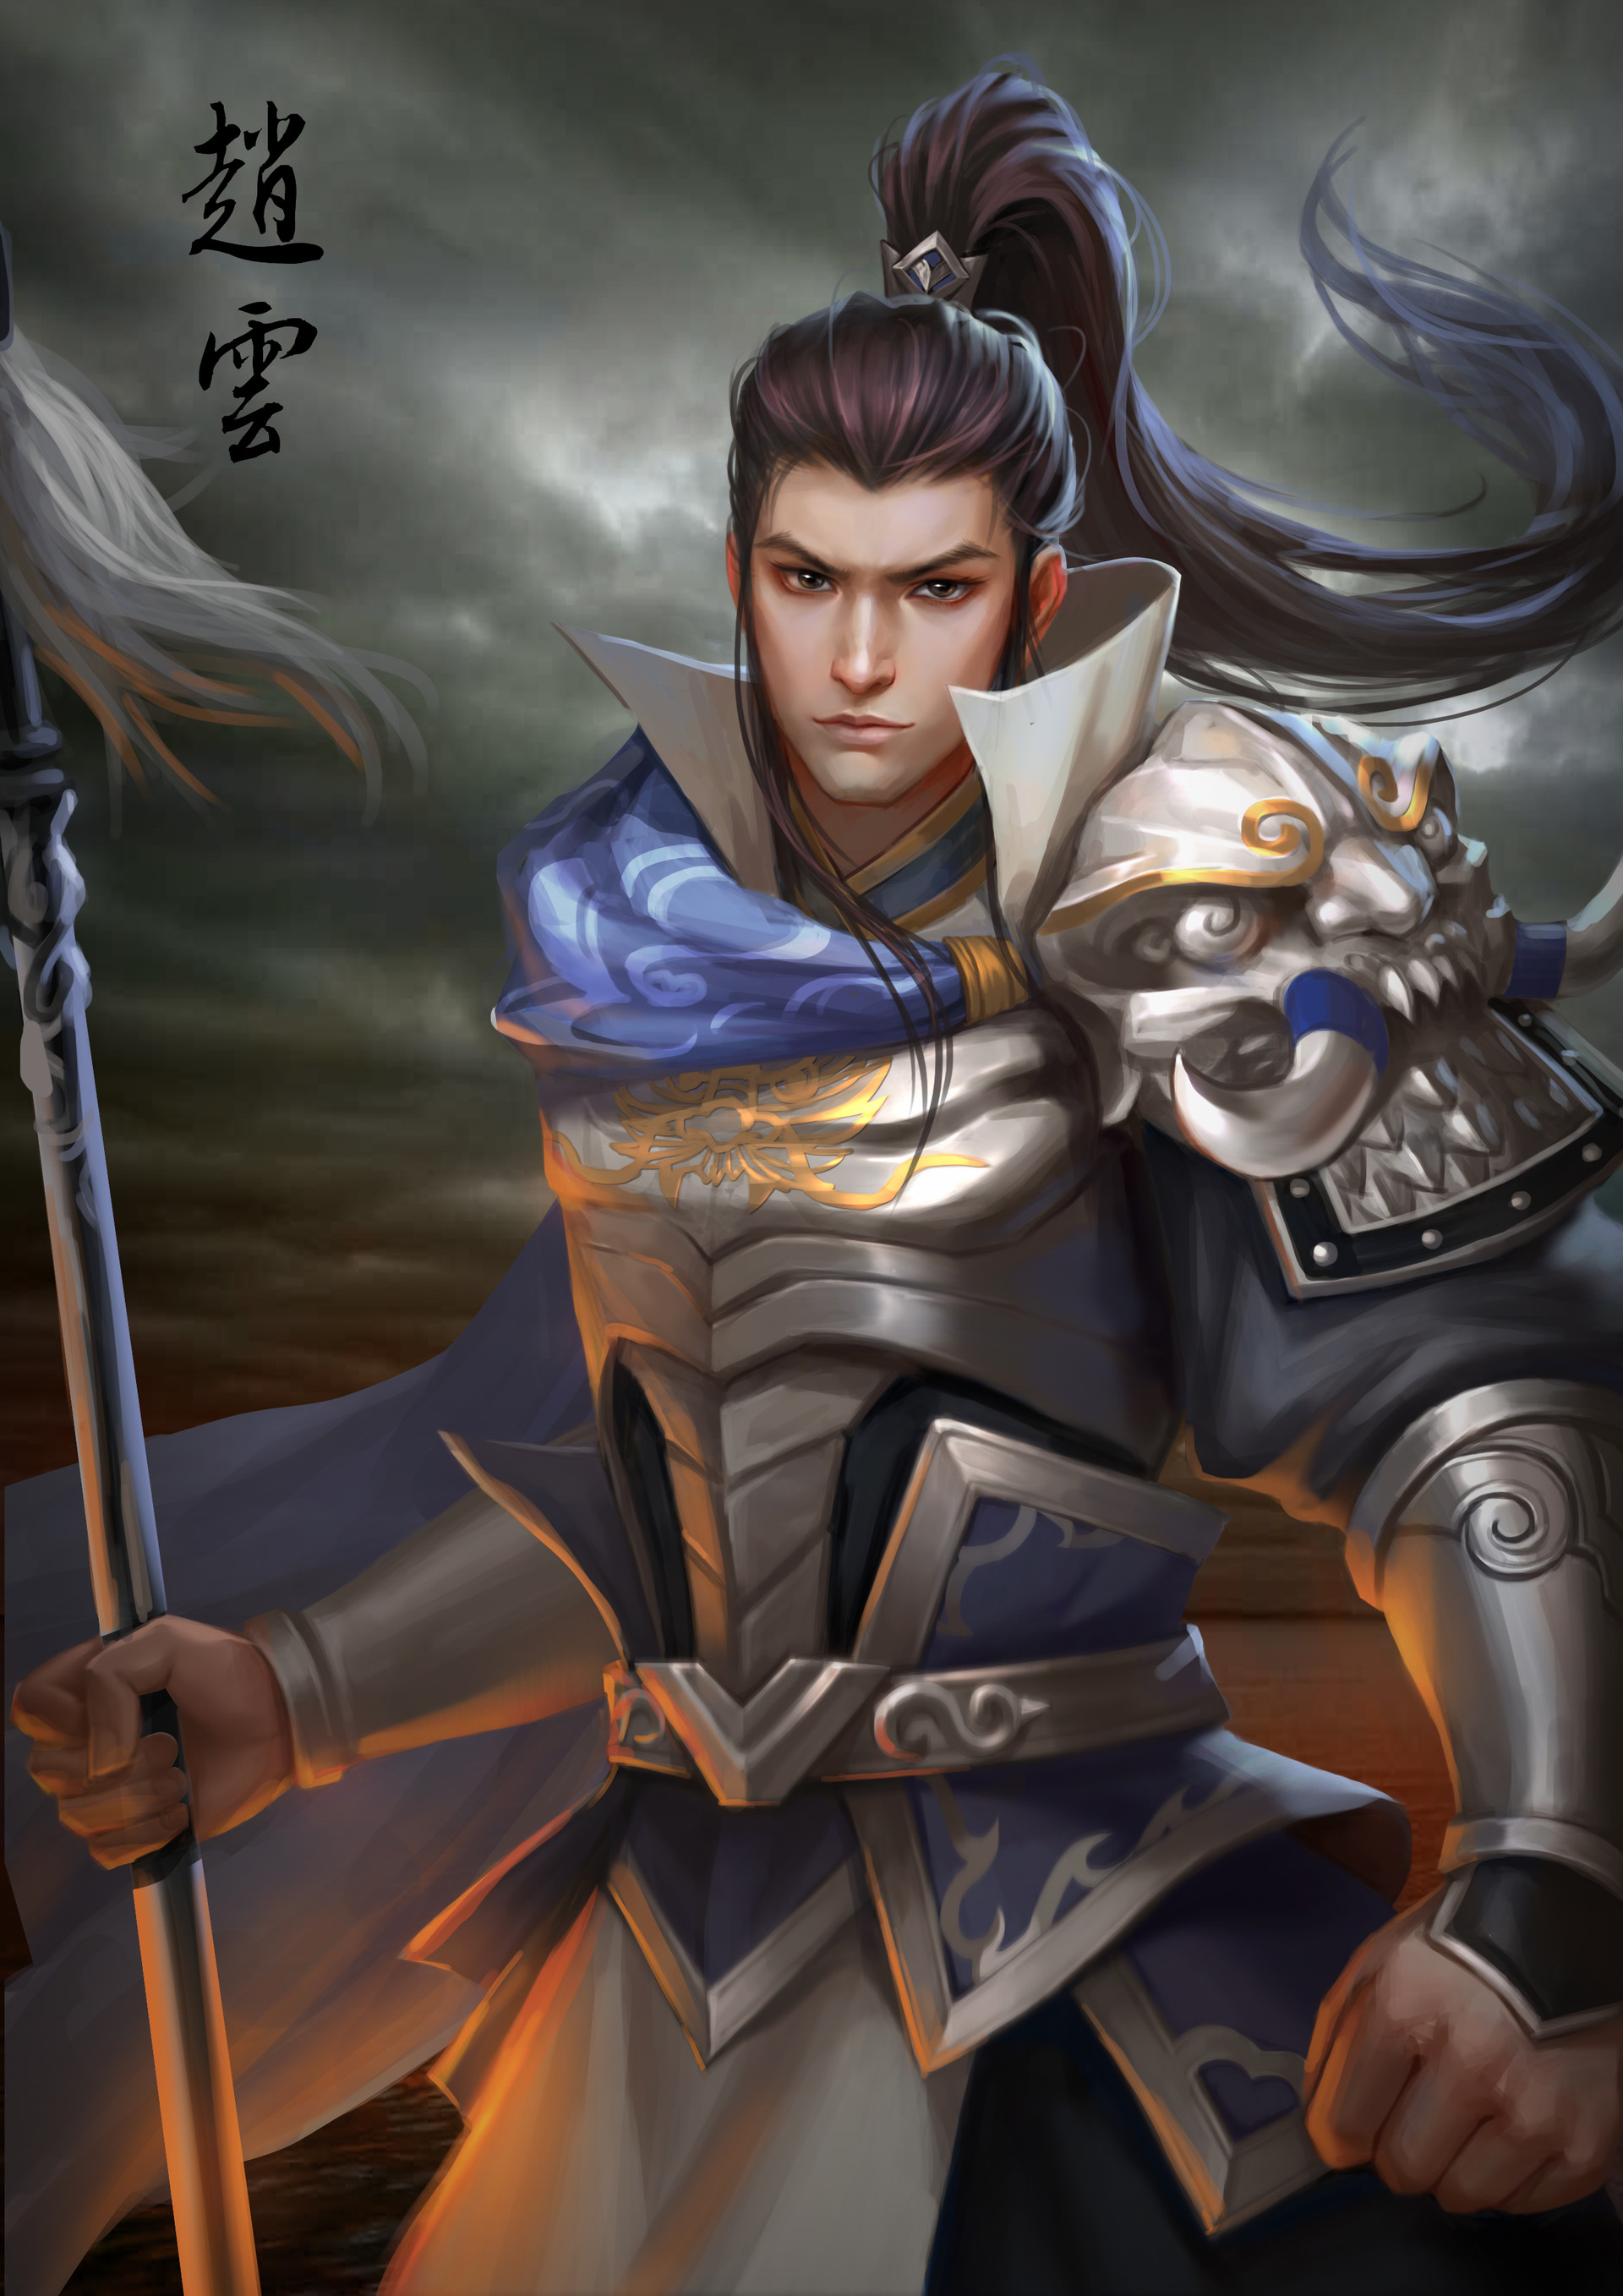 ArtStation - A juvenile general in ancient China